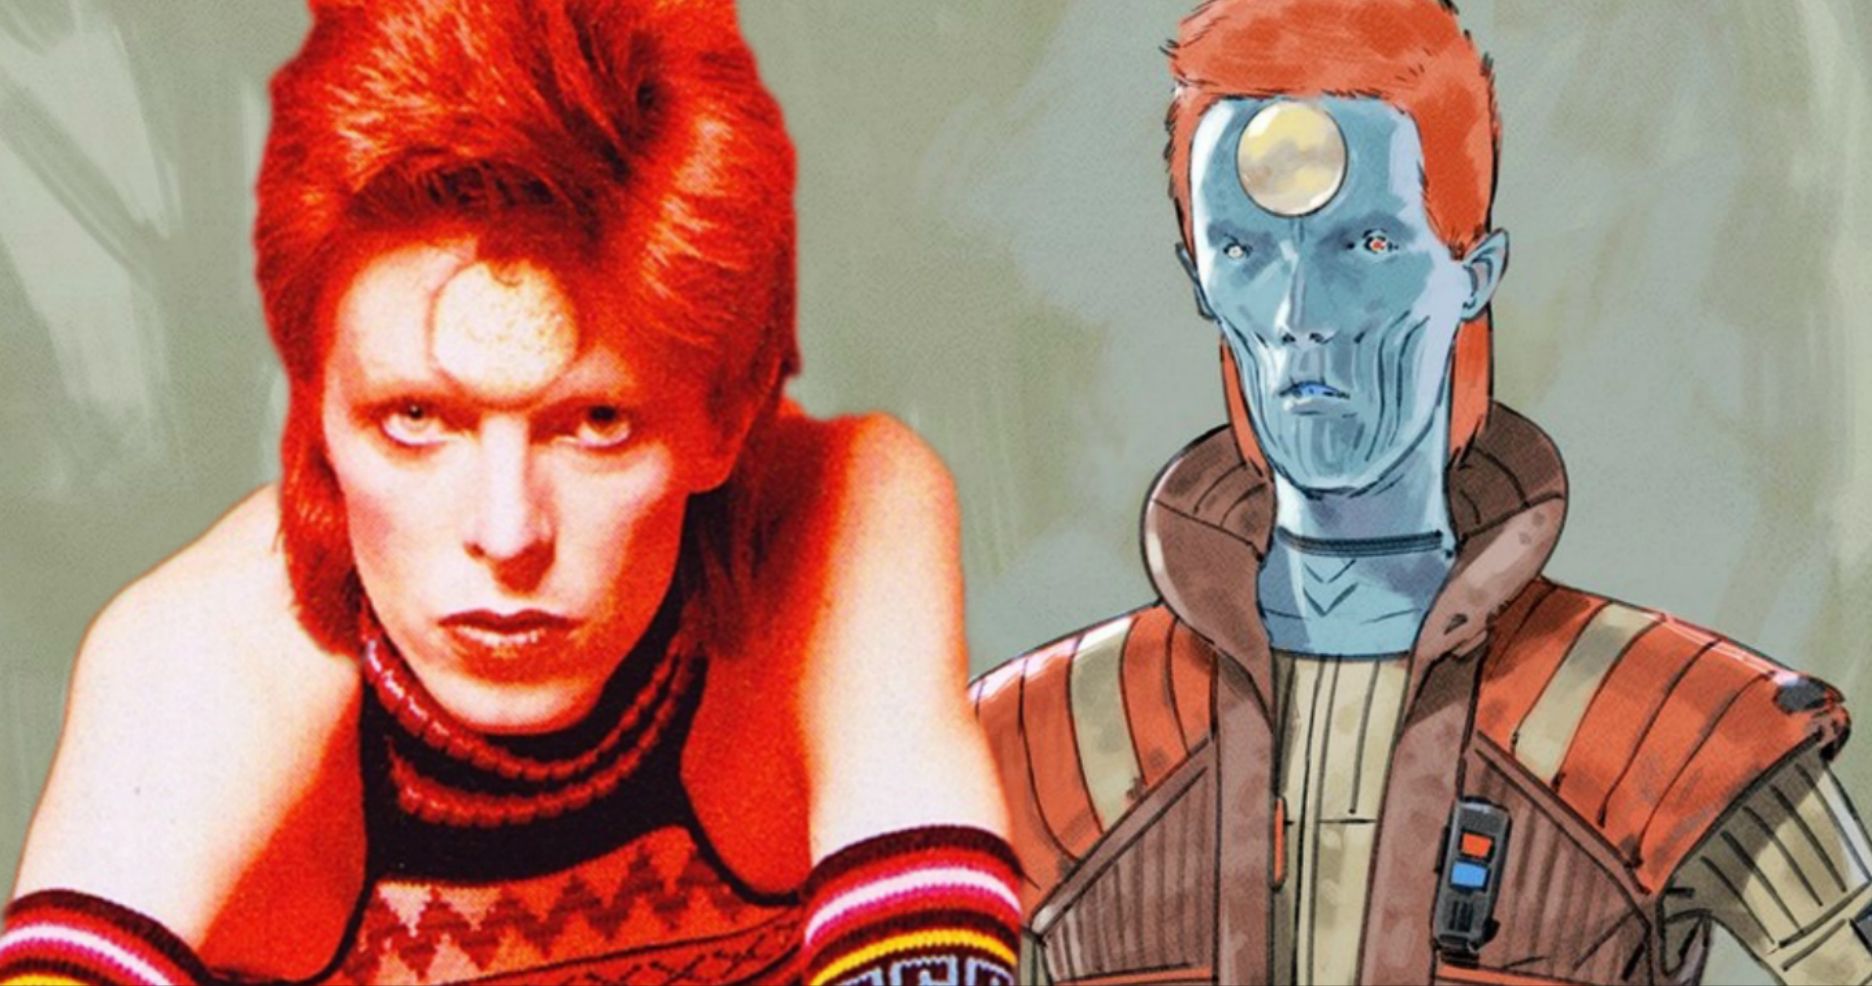 Scrapped The Rise of Skywalker Art Pays Ziggy Stardust Tribute to David Bowie